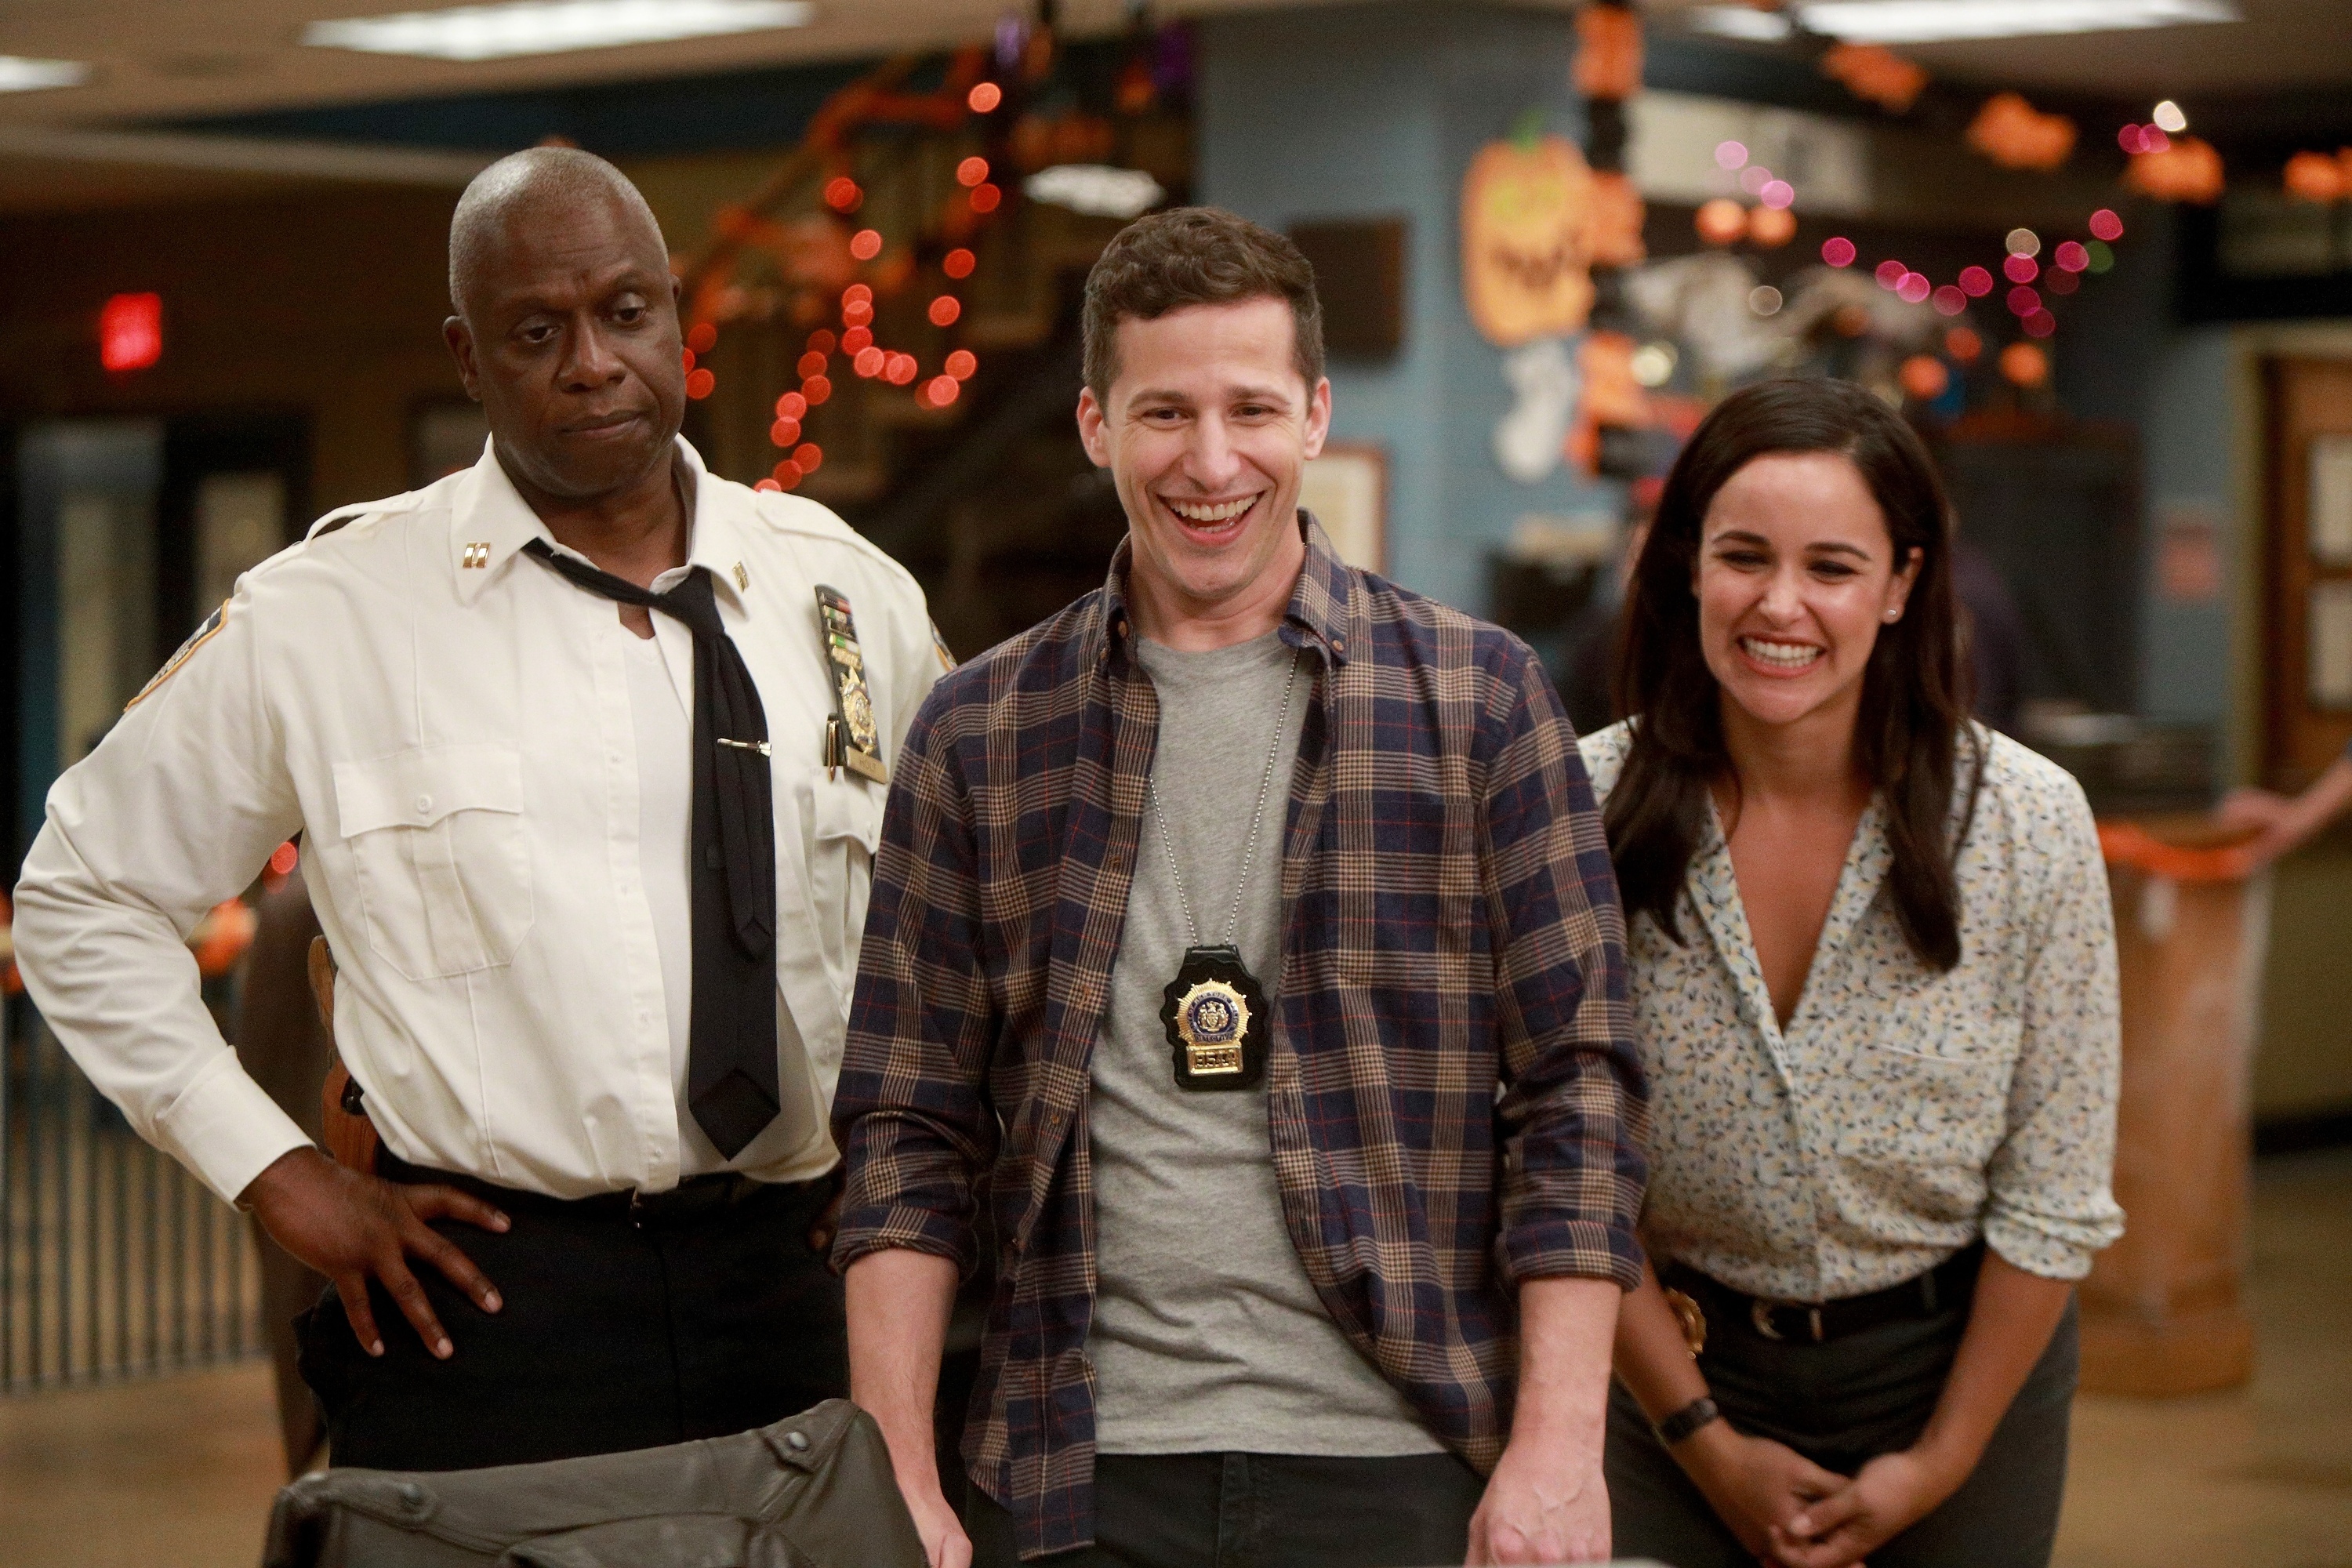 Andre Braugher, Andy Samberg and Melissa Fumero in the HalloVeen episode of BROOKLYN NINE-NINE airing Tuesday, Oct. 17 (FOX—;FOX via Getty Images)